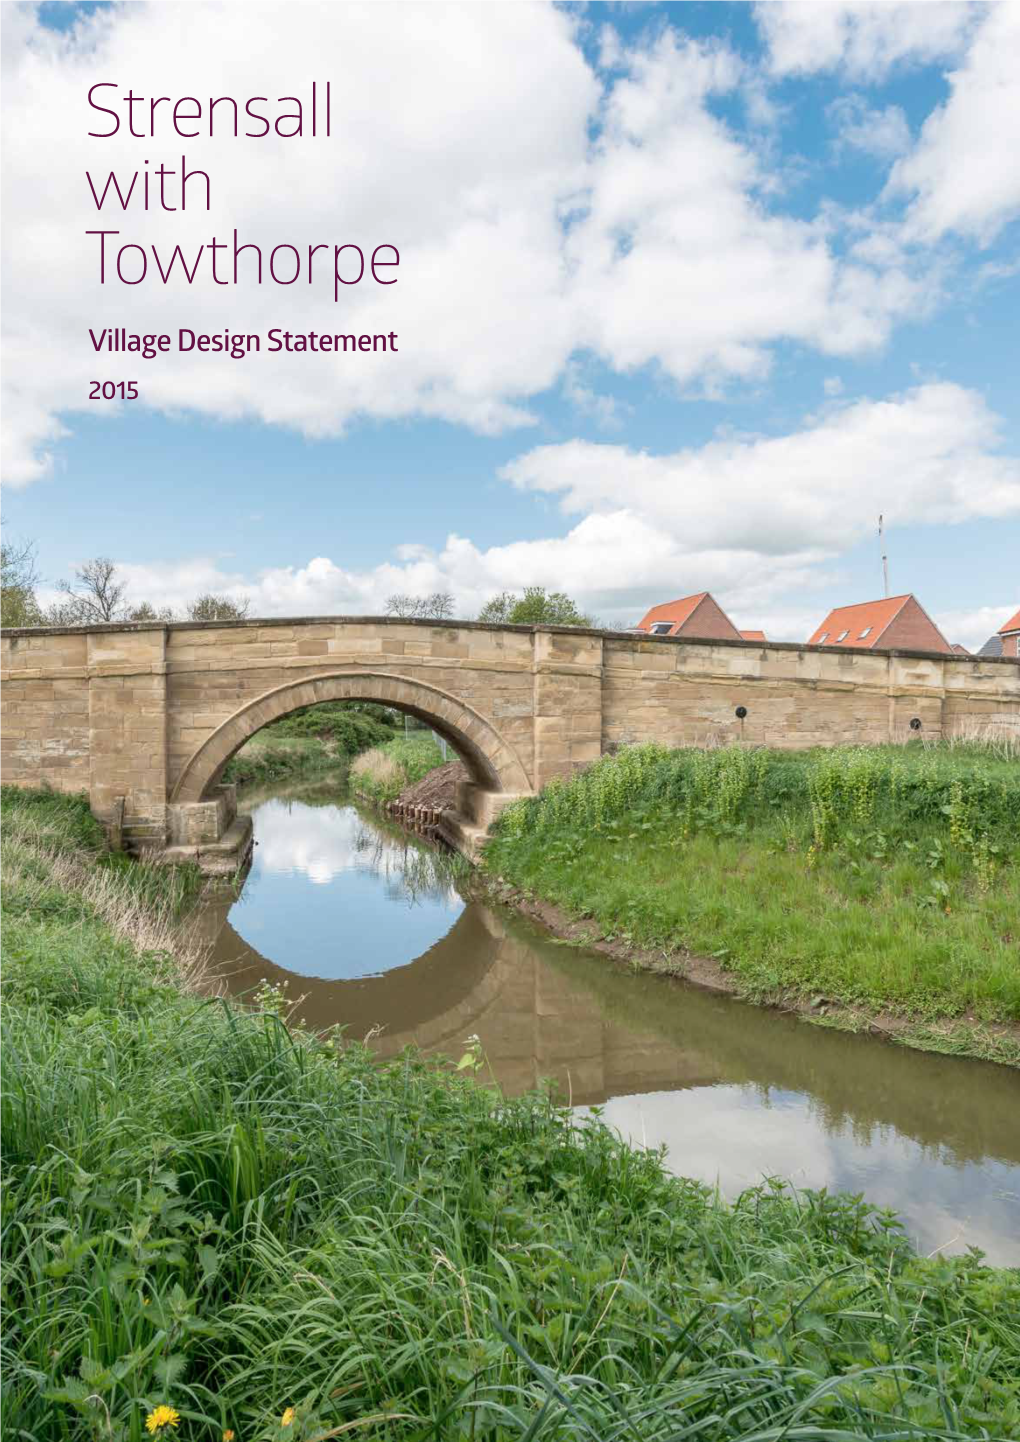 Strensall with Towthorpe Village Design Statement 2015 Strensall with Towthorpe Village Design Statement